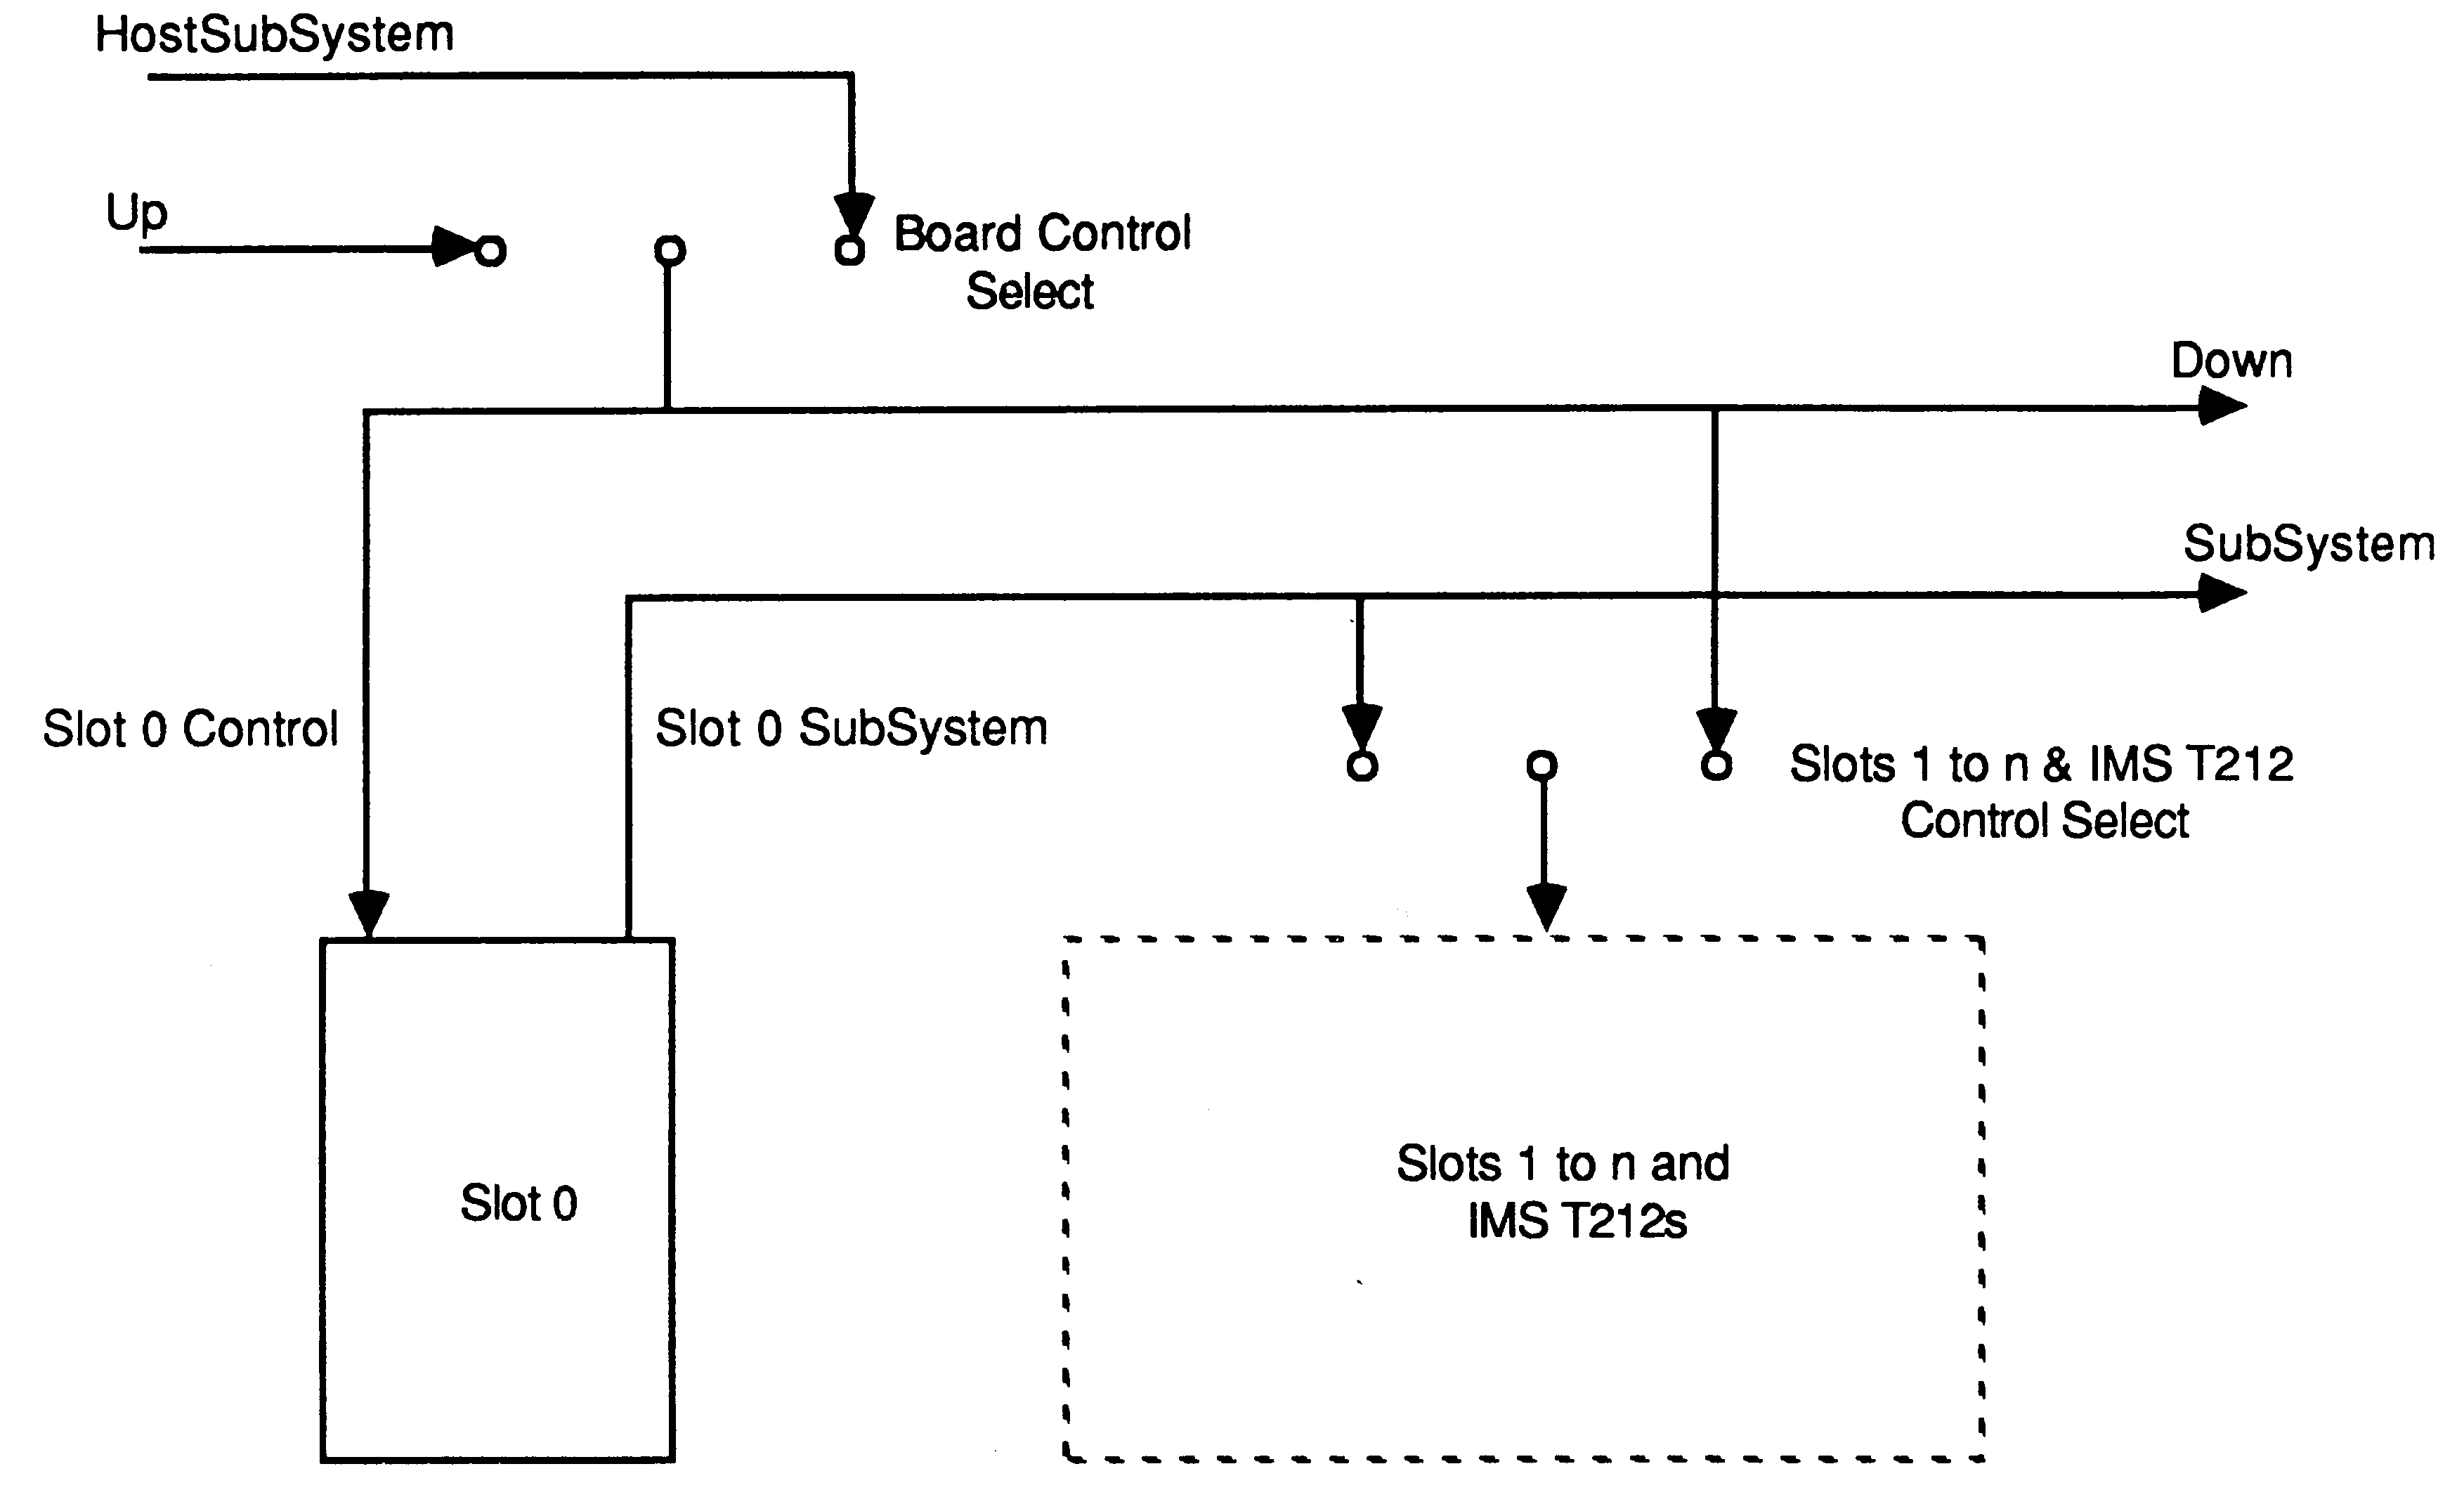 Controlling a subsystem of boards